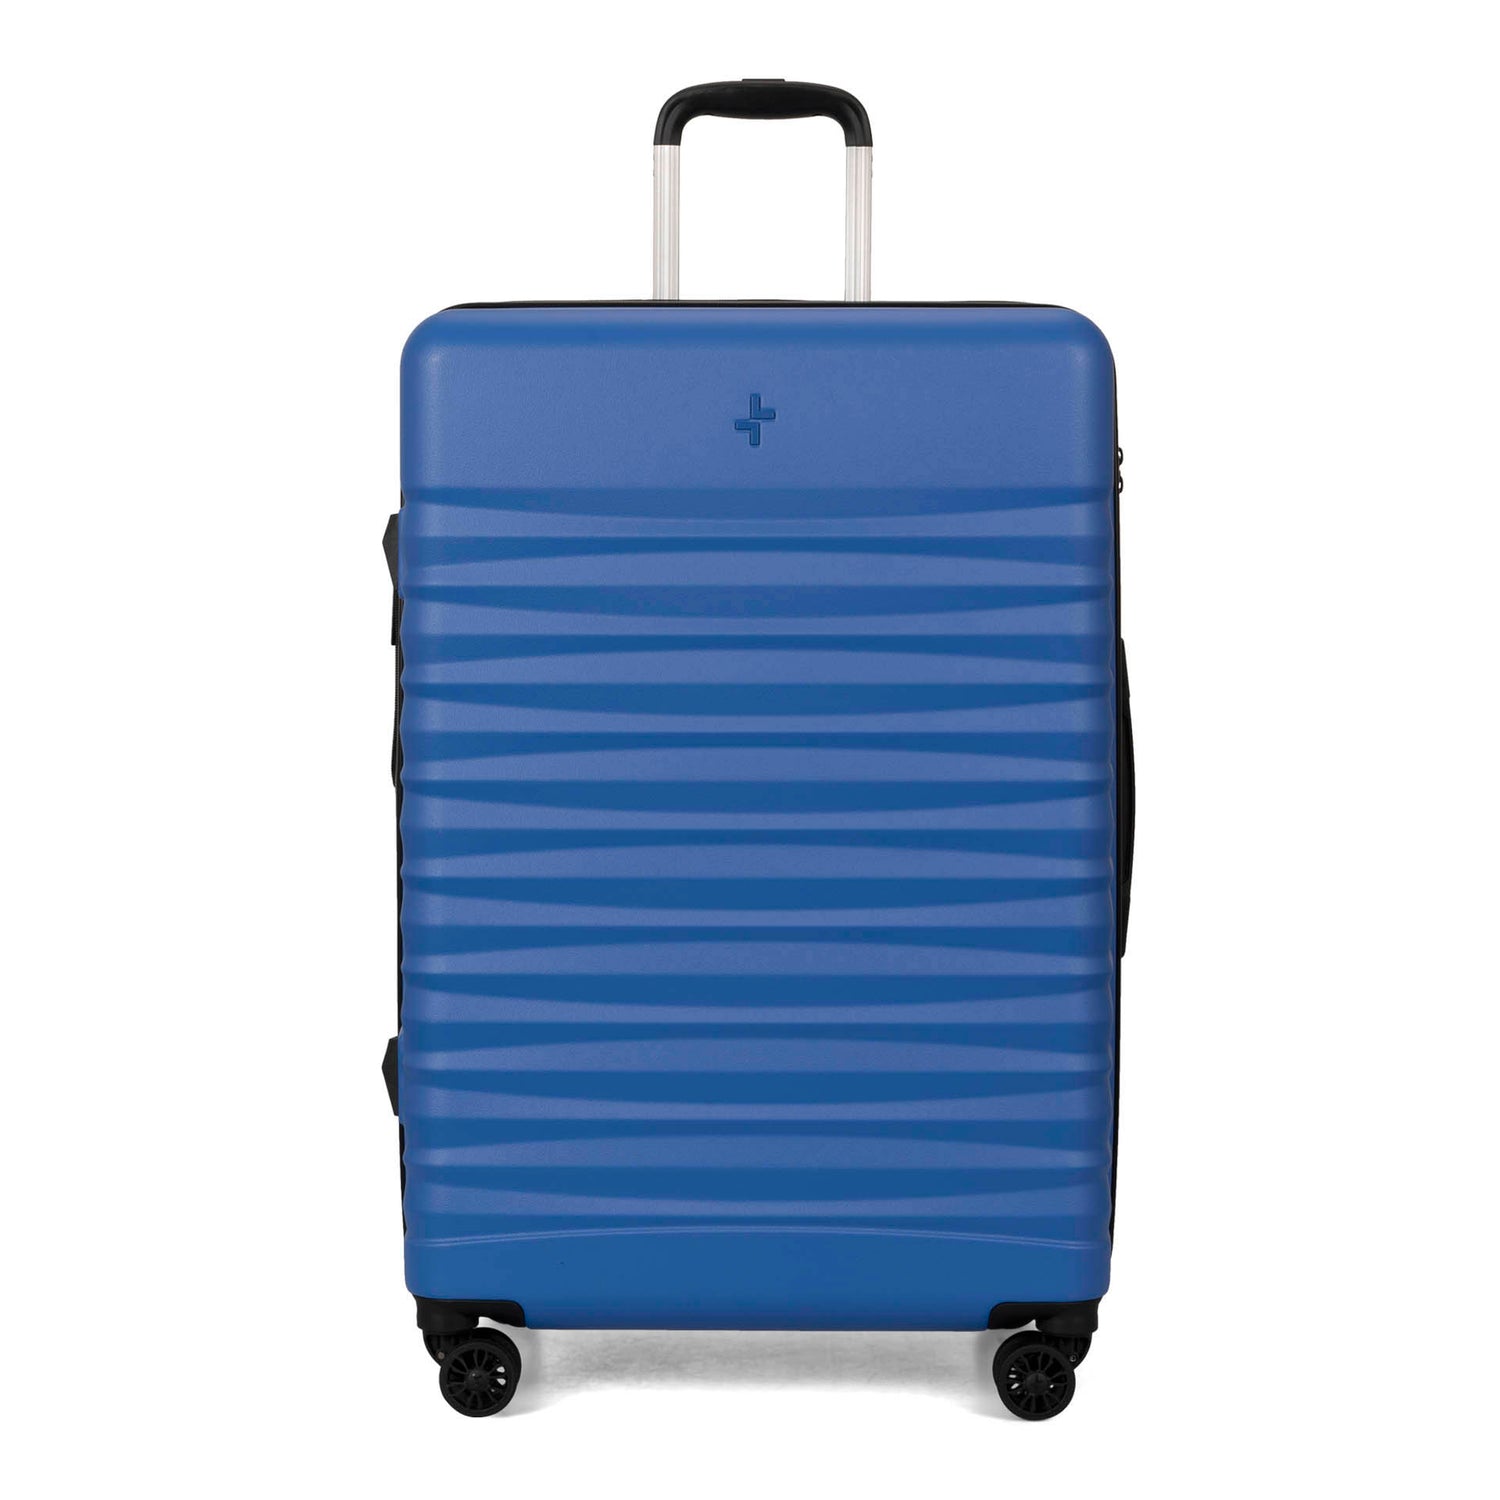 Front side of a blue luggage called Oceanside Hardside 29" Luggage designed by Tracker showing its telescopic handle, linear shell pattern, spinner wheels.